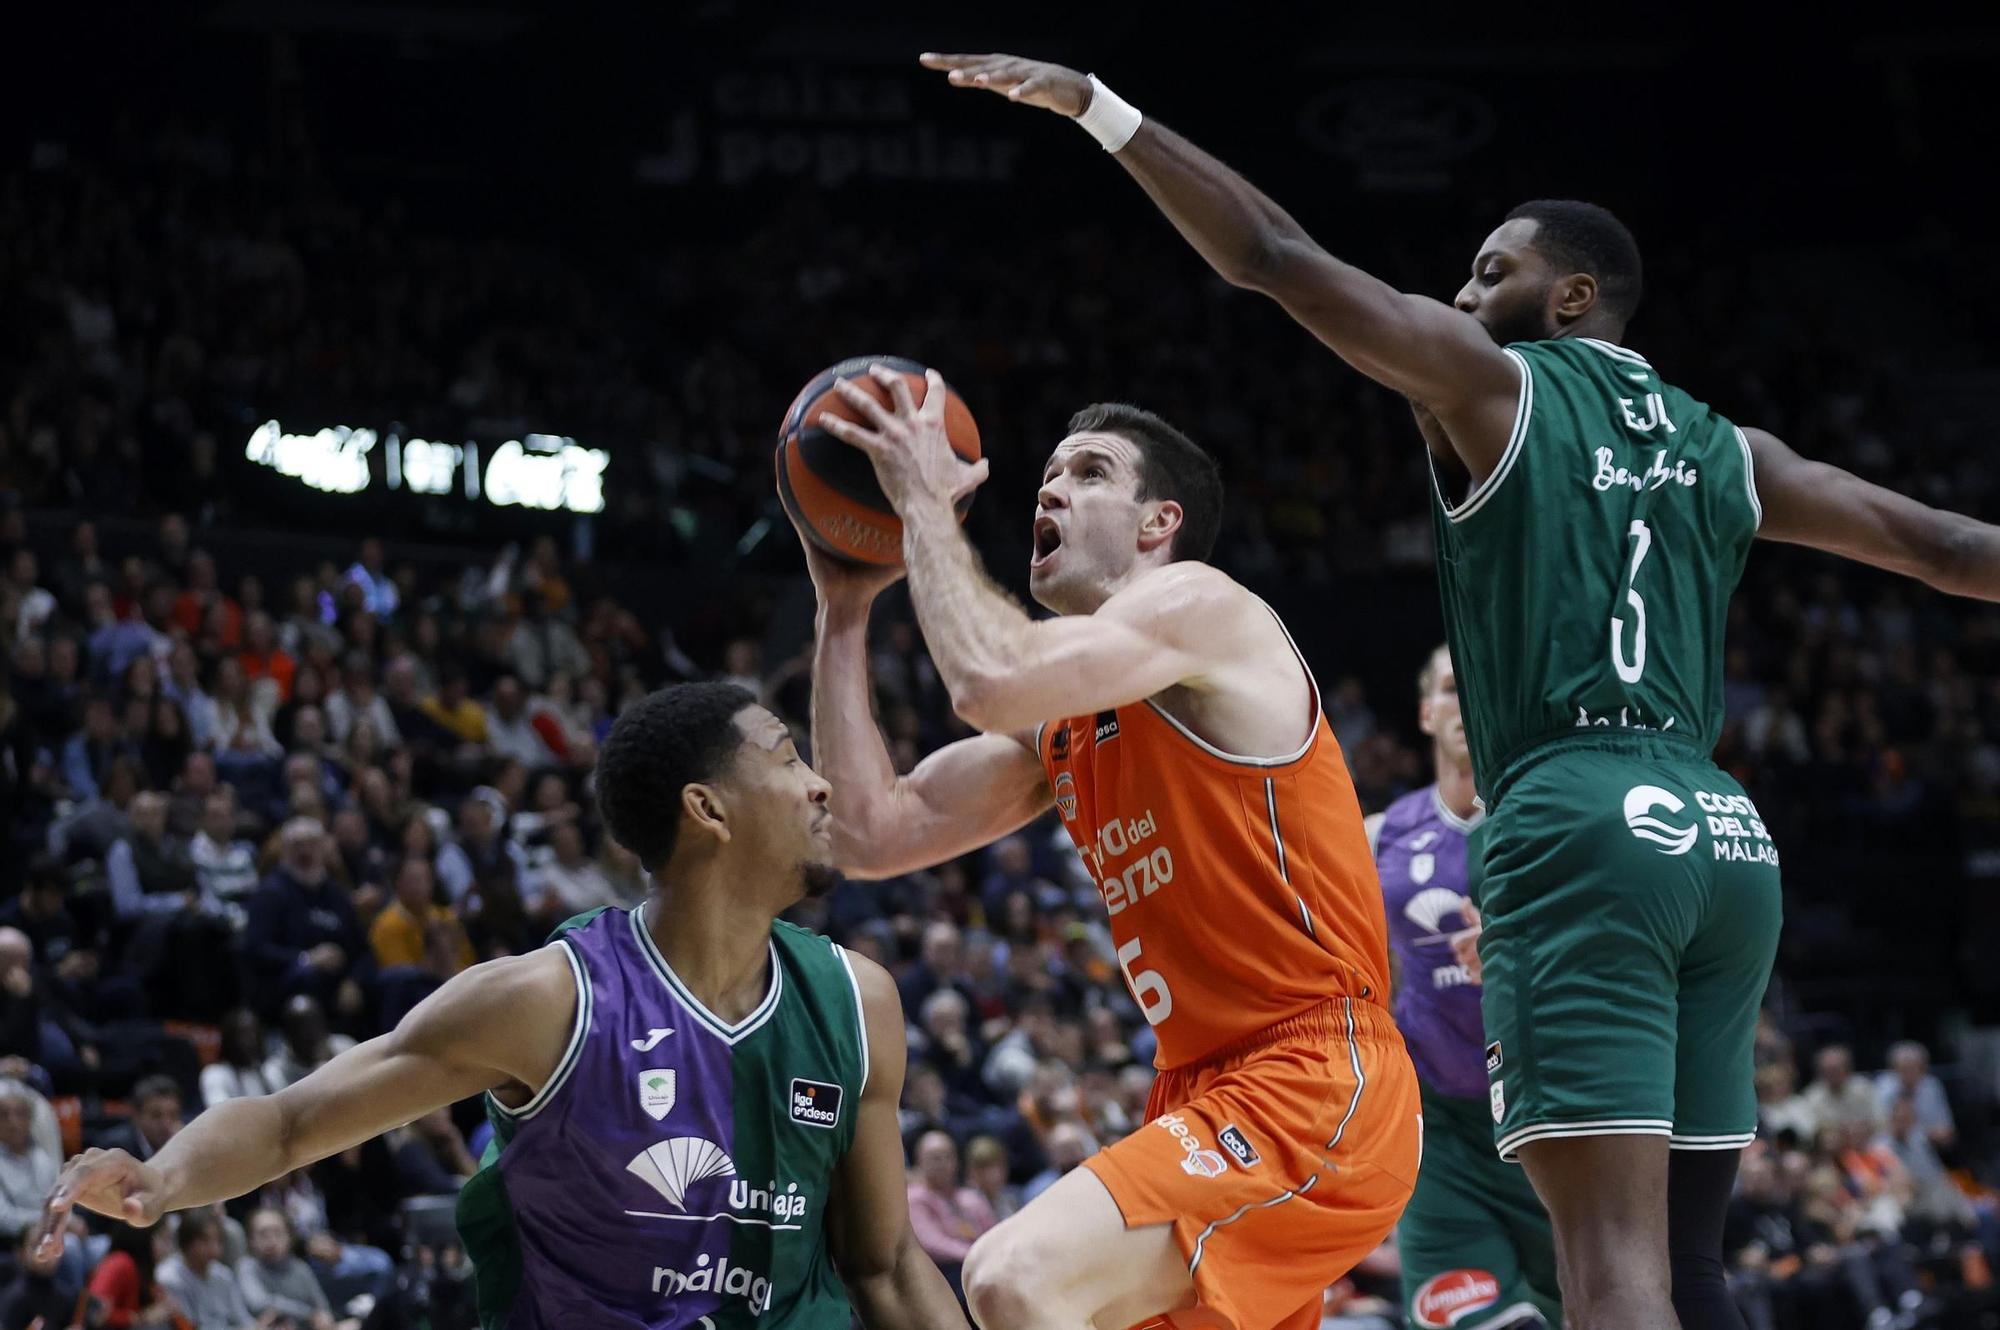 Ejim played a decisive role in defense and stopped Valencia's attackers.